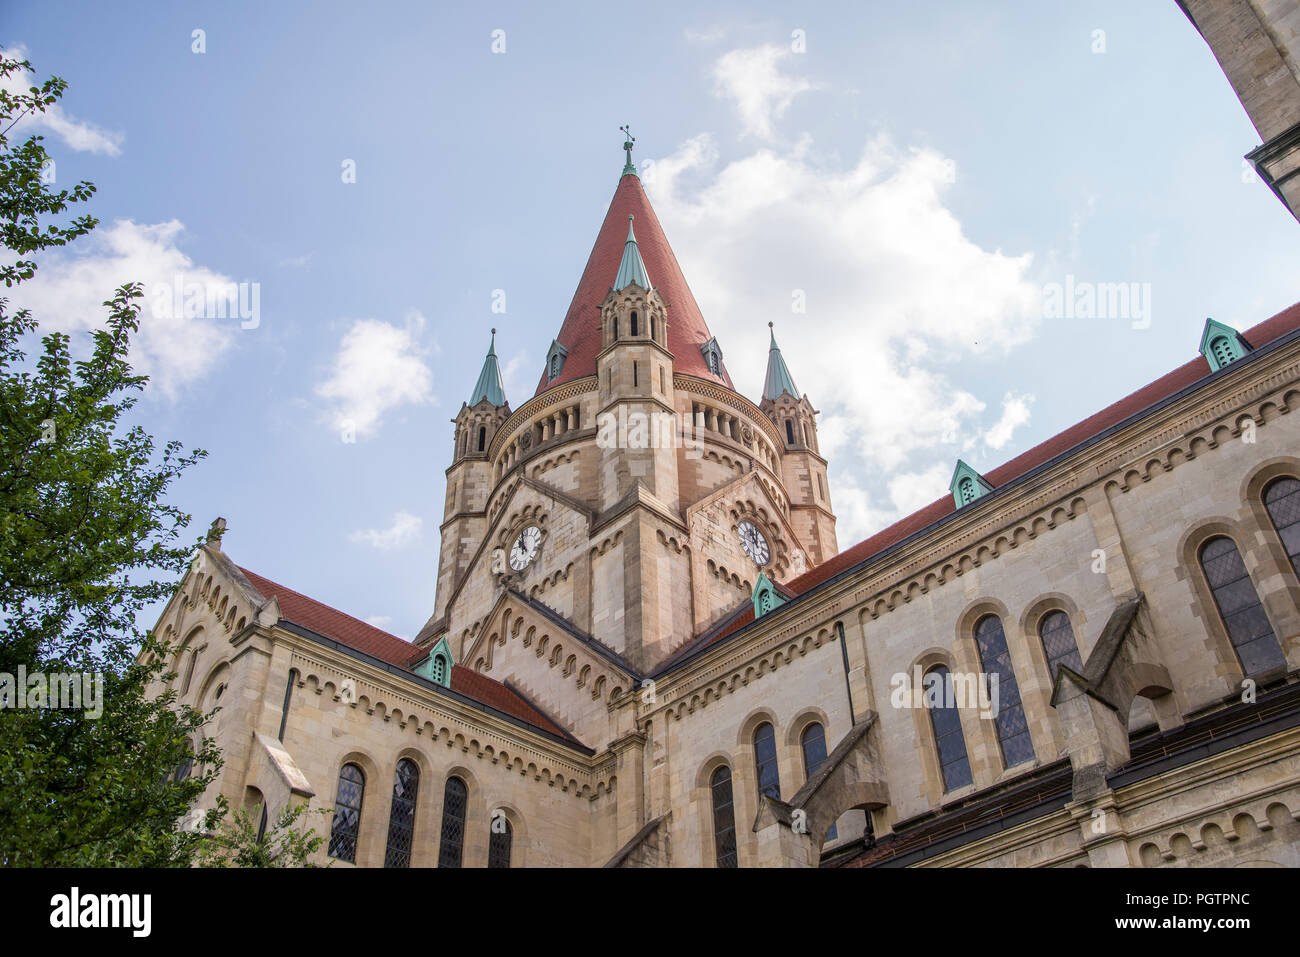 St. Francis of Assisi Church built in the Rhenish-Romanesque style located on the Mexikoplatz in Vienna Austria. Stock Photo